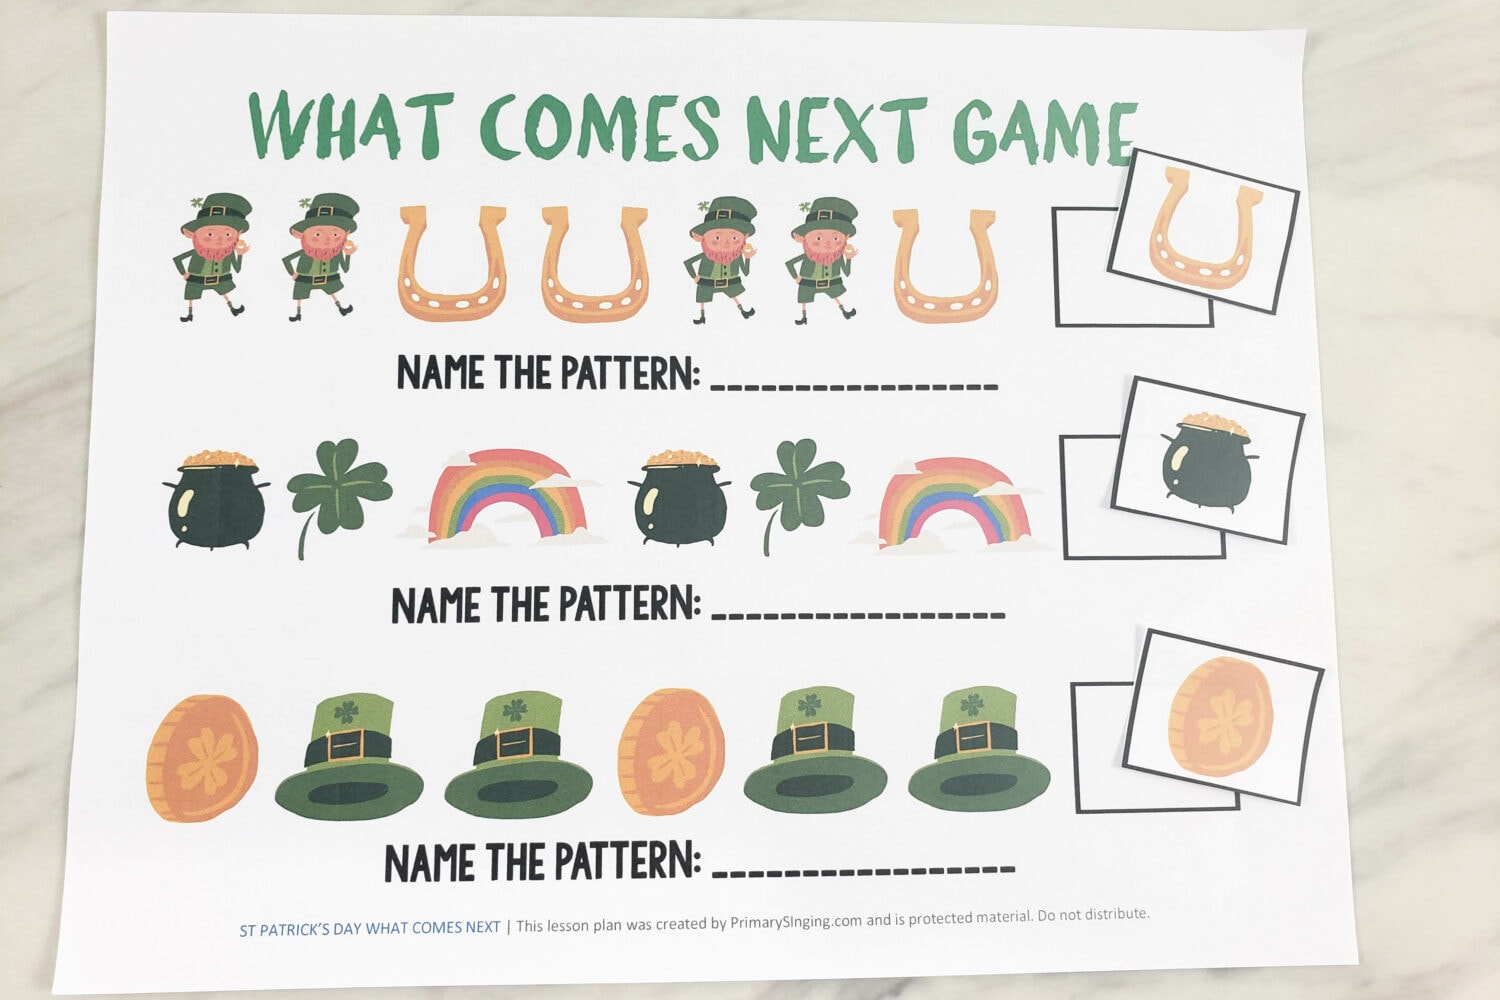 St Patrick's Day Hidden Clovers Game Easy ideas for Music Leaders St Patricks Day What Comes Next 20220225 093501